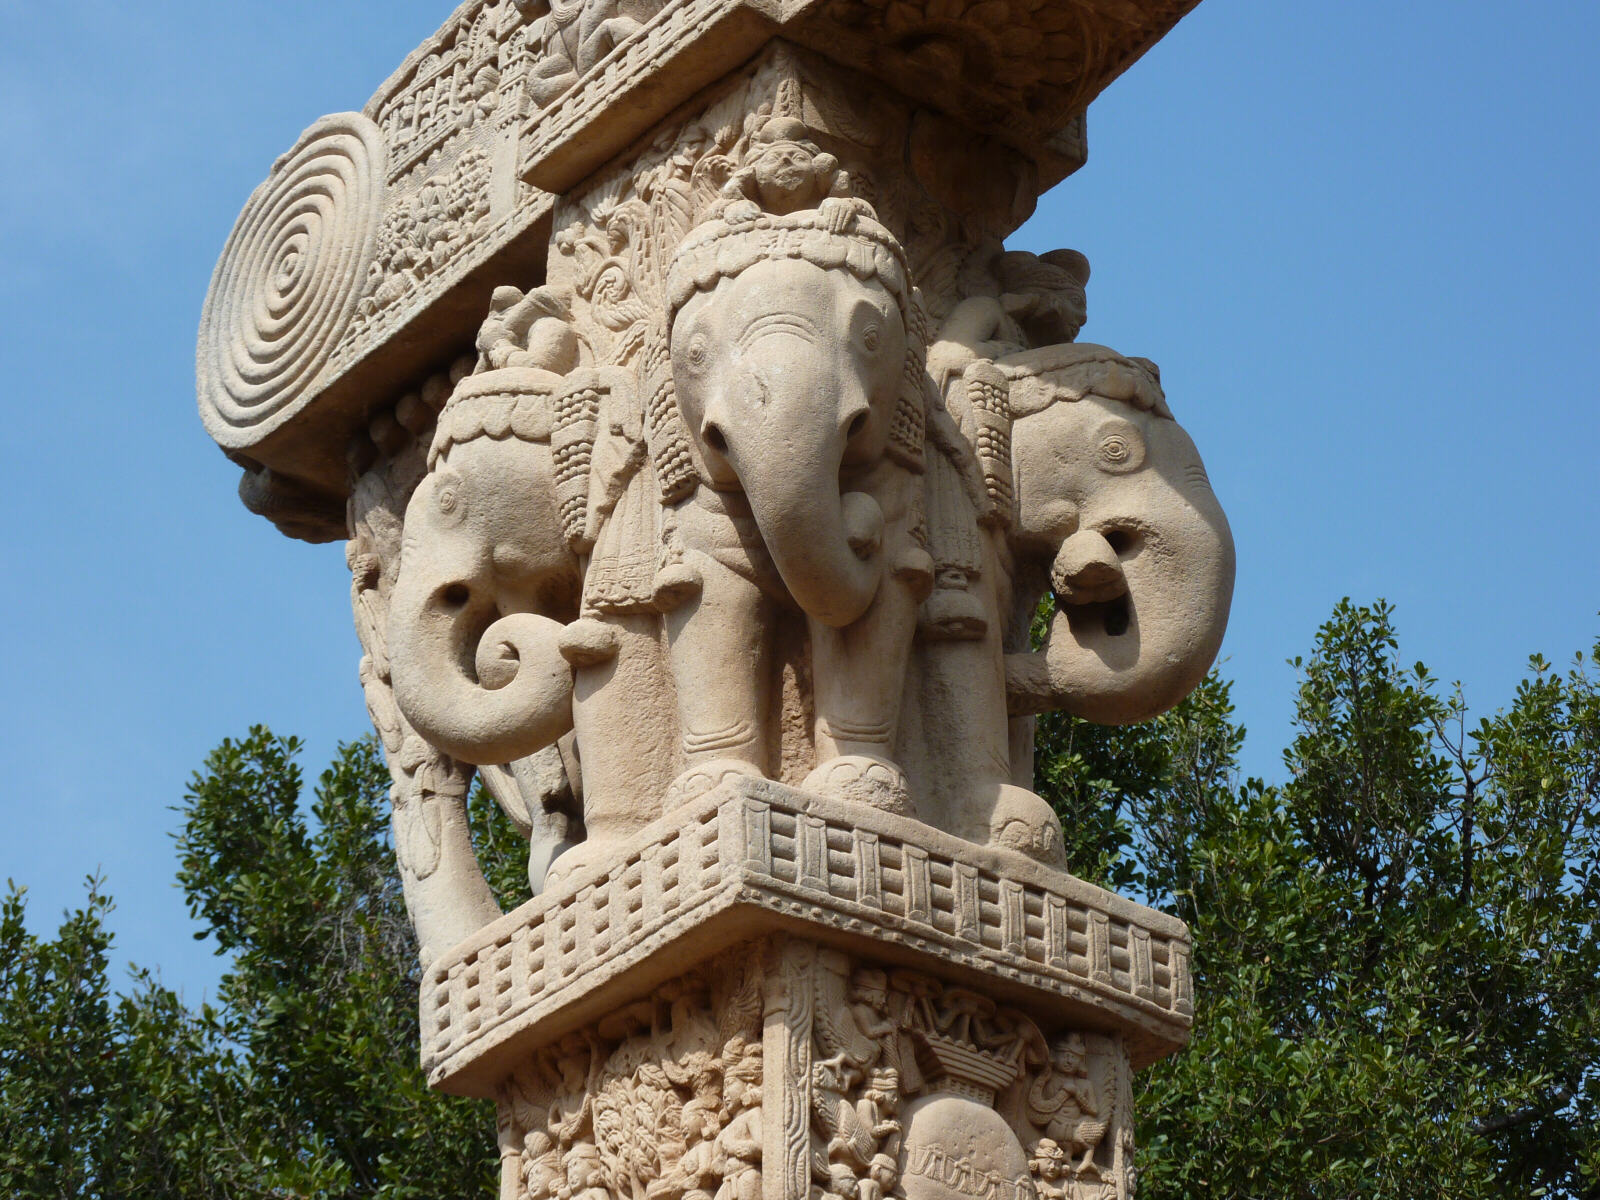 A carving of elephants at Sanchi stupa, India